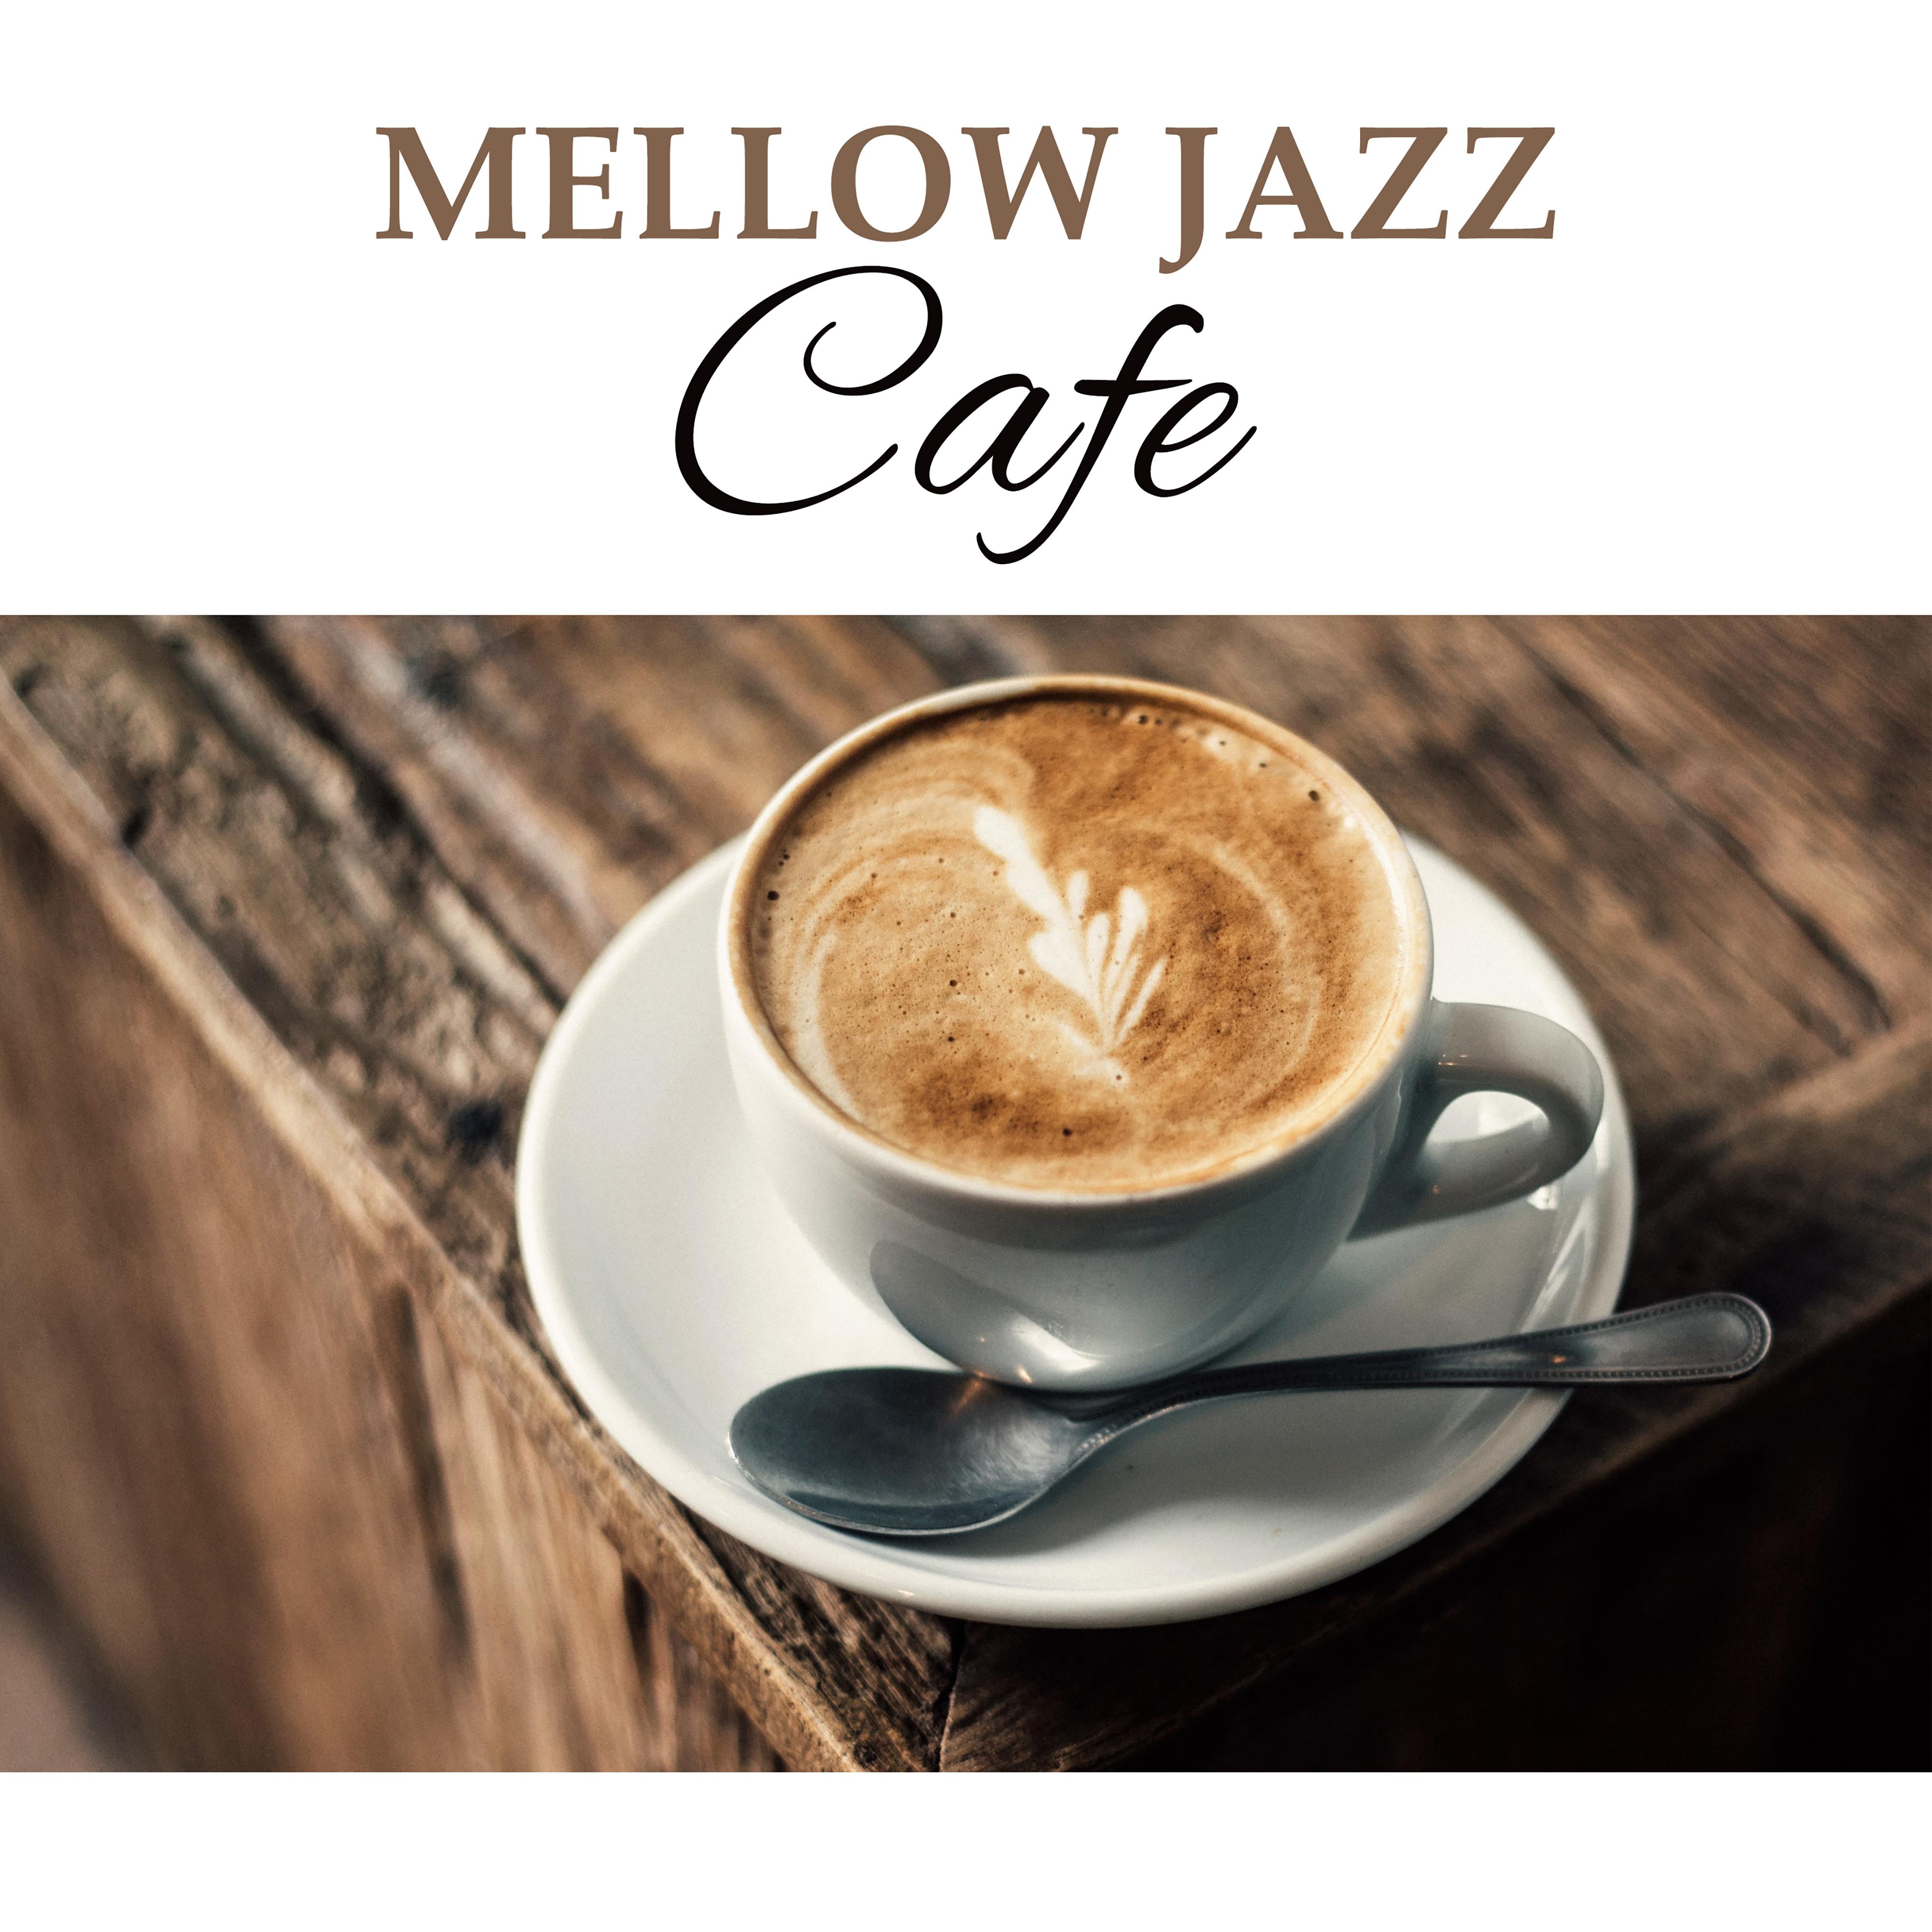 Mellow Jazz Cafe – Instrumental Music for Restaurant, Deep Relaxation, Dinner with Family, Healing Piano, Smooth Jazz